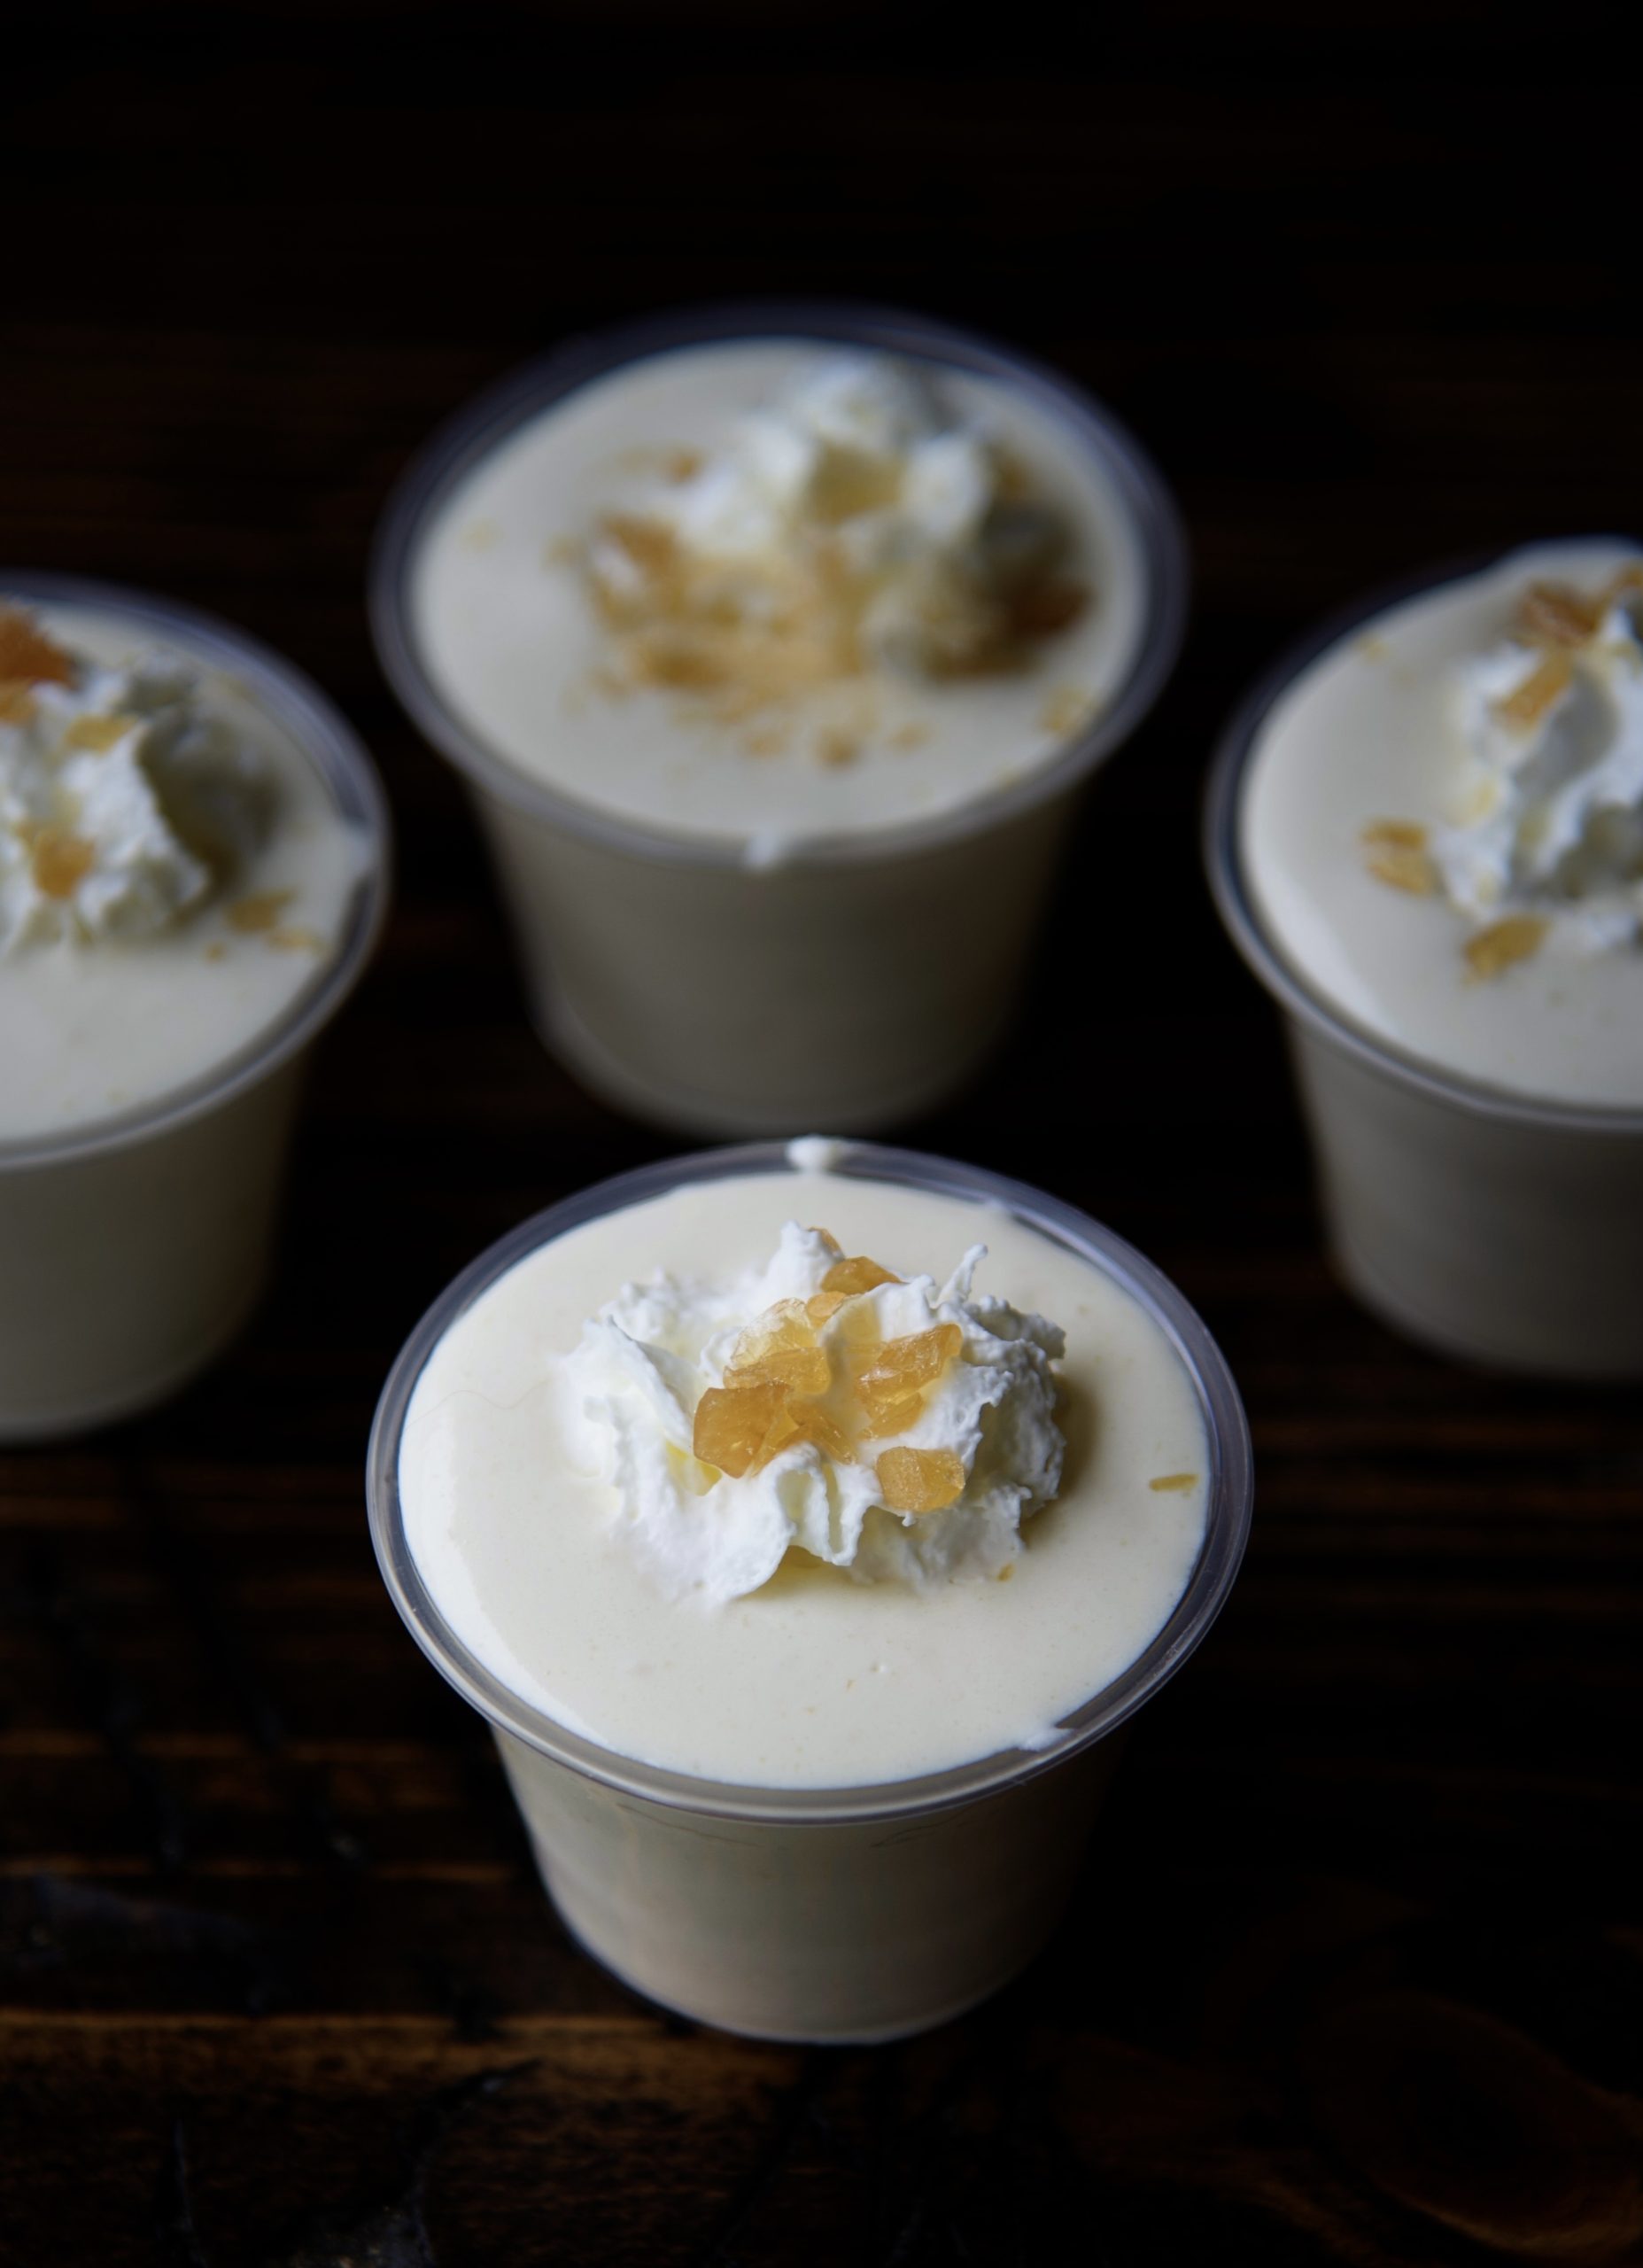 Four pudding shots with the center one being the focus. Shots are topped with whipped cream and crushed butter rum candies. 